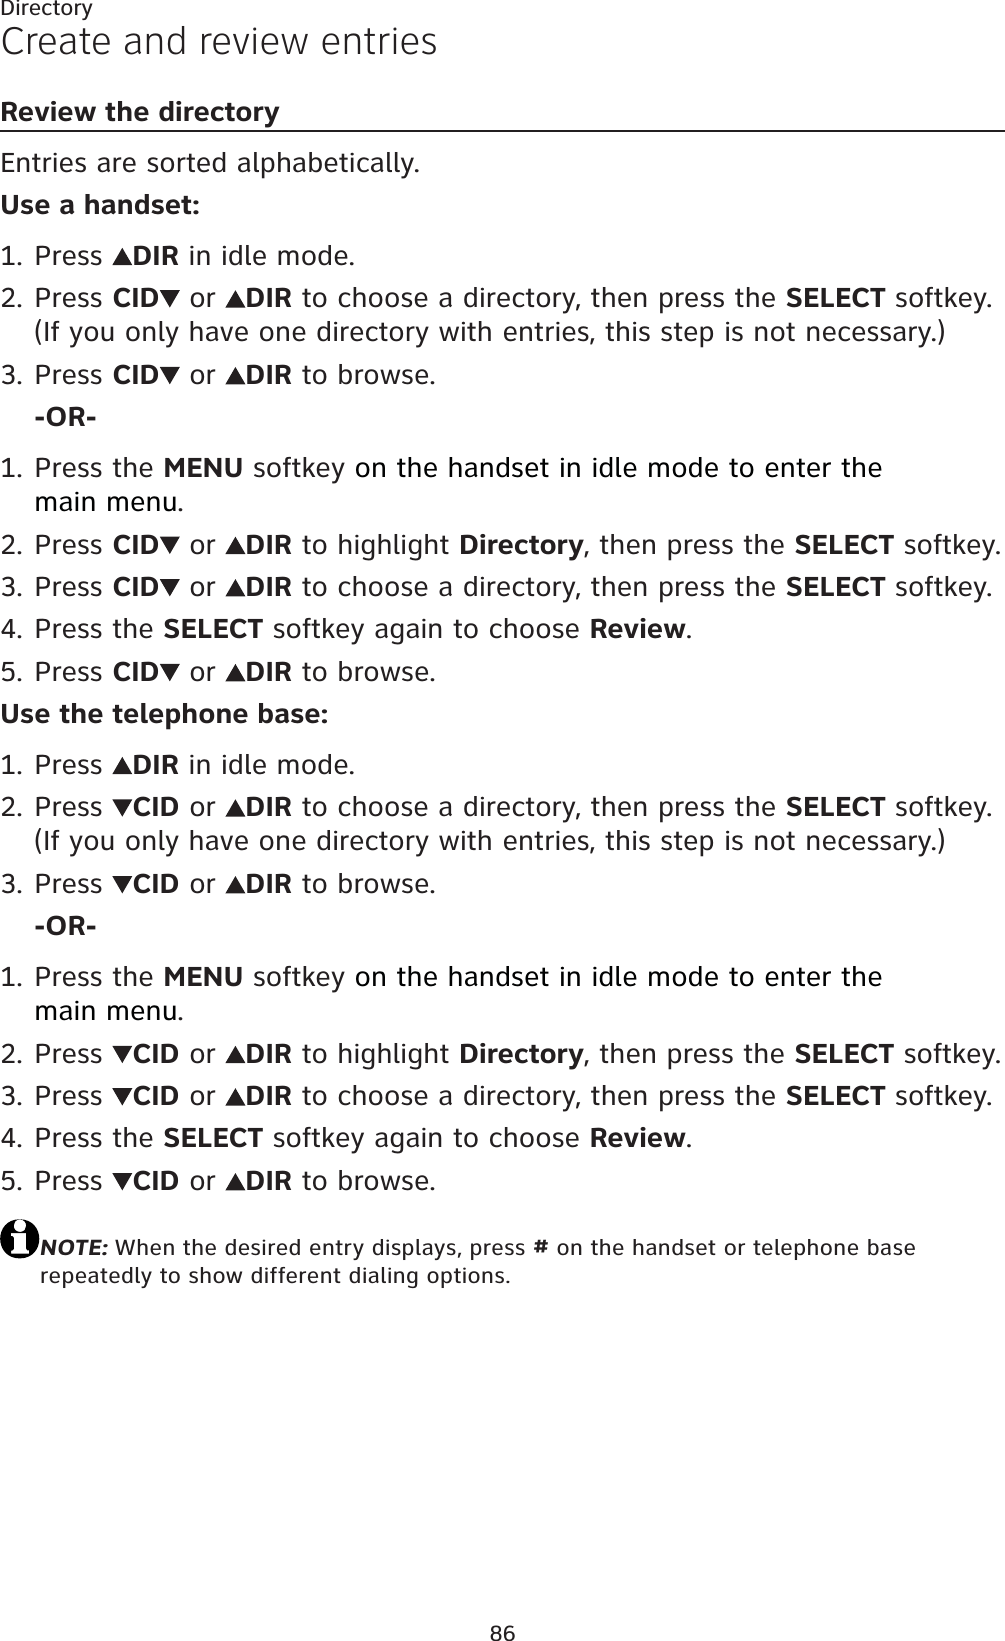 86DirectoryCreate and review entriesReview the directoryEntries are sorted alphabetically.Use a handset:Press  DIR in idle mode.Press CID  or  DIR to choose a directory, then press the SELECT softkey. (If you only have one directory with entries, this step is not necessary.)Press CID  or  DIR to browse.-OR-Press the MENU softkey on the handset in idle mode to enter the main menu.Press CID  or  DIR to highlight Directory, then press the SELECT softkey.Press CID  or  DIR to choose a directory, then press the SELECT softkey.Press the SELECT softkey again to choose Review.Press CID  or  DIR to browse.Use the telephone base:Press  DIR in idle mode.Press  CID or  DIR to choose a directory, then press the SELECT softkey. (If you only have one directory with entries, this step is not necessary.)Press  CID or  DIR to browse.-OR-Press the MENU softkey on the handset in idle mode to enter the main menu.Press  CID or  DIR to highlight Directory, then press the SELECT softkey.Press  CID or  DIR to choose a directory, then press the SELECT softkey.Press the SELECT softkey again to choose Review.Press  CID or  DIR to browse.NOTE: When the desired entry displays, press # on the handset or telephone base repeatedly to show different dialing options.1.2.3.1.2.3.4.5.1.2.3.1.2.3.4.5.